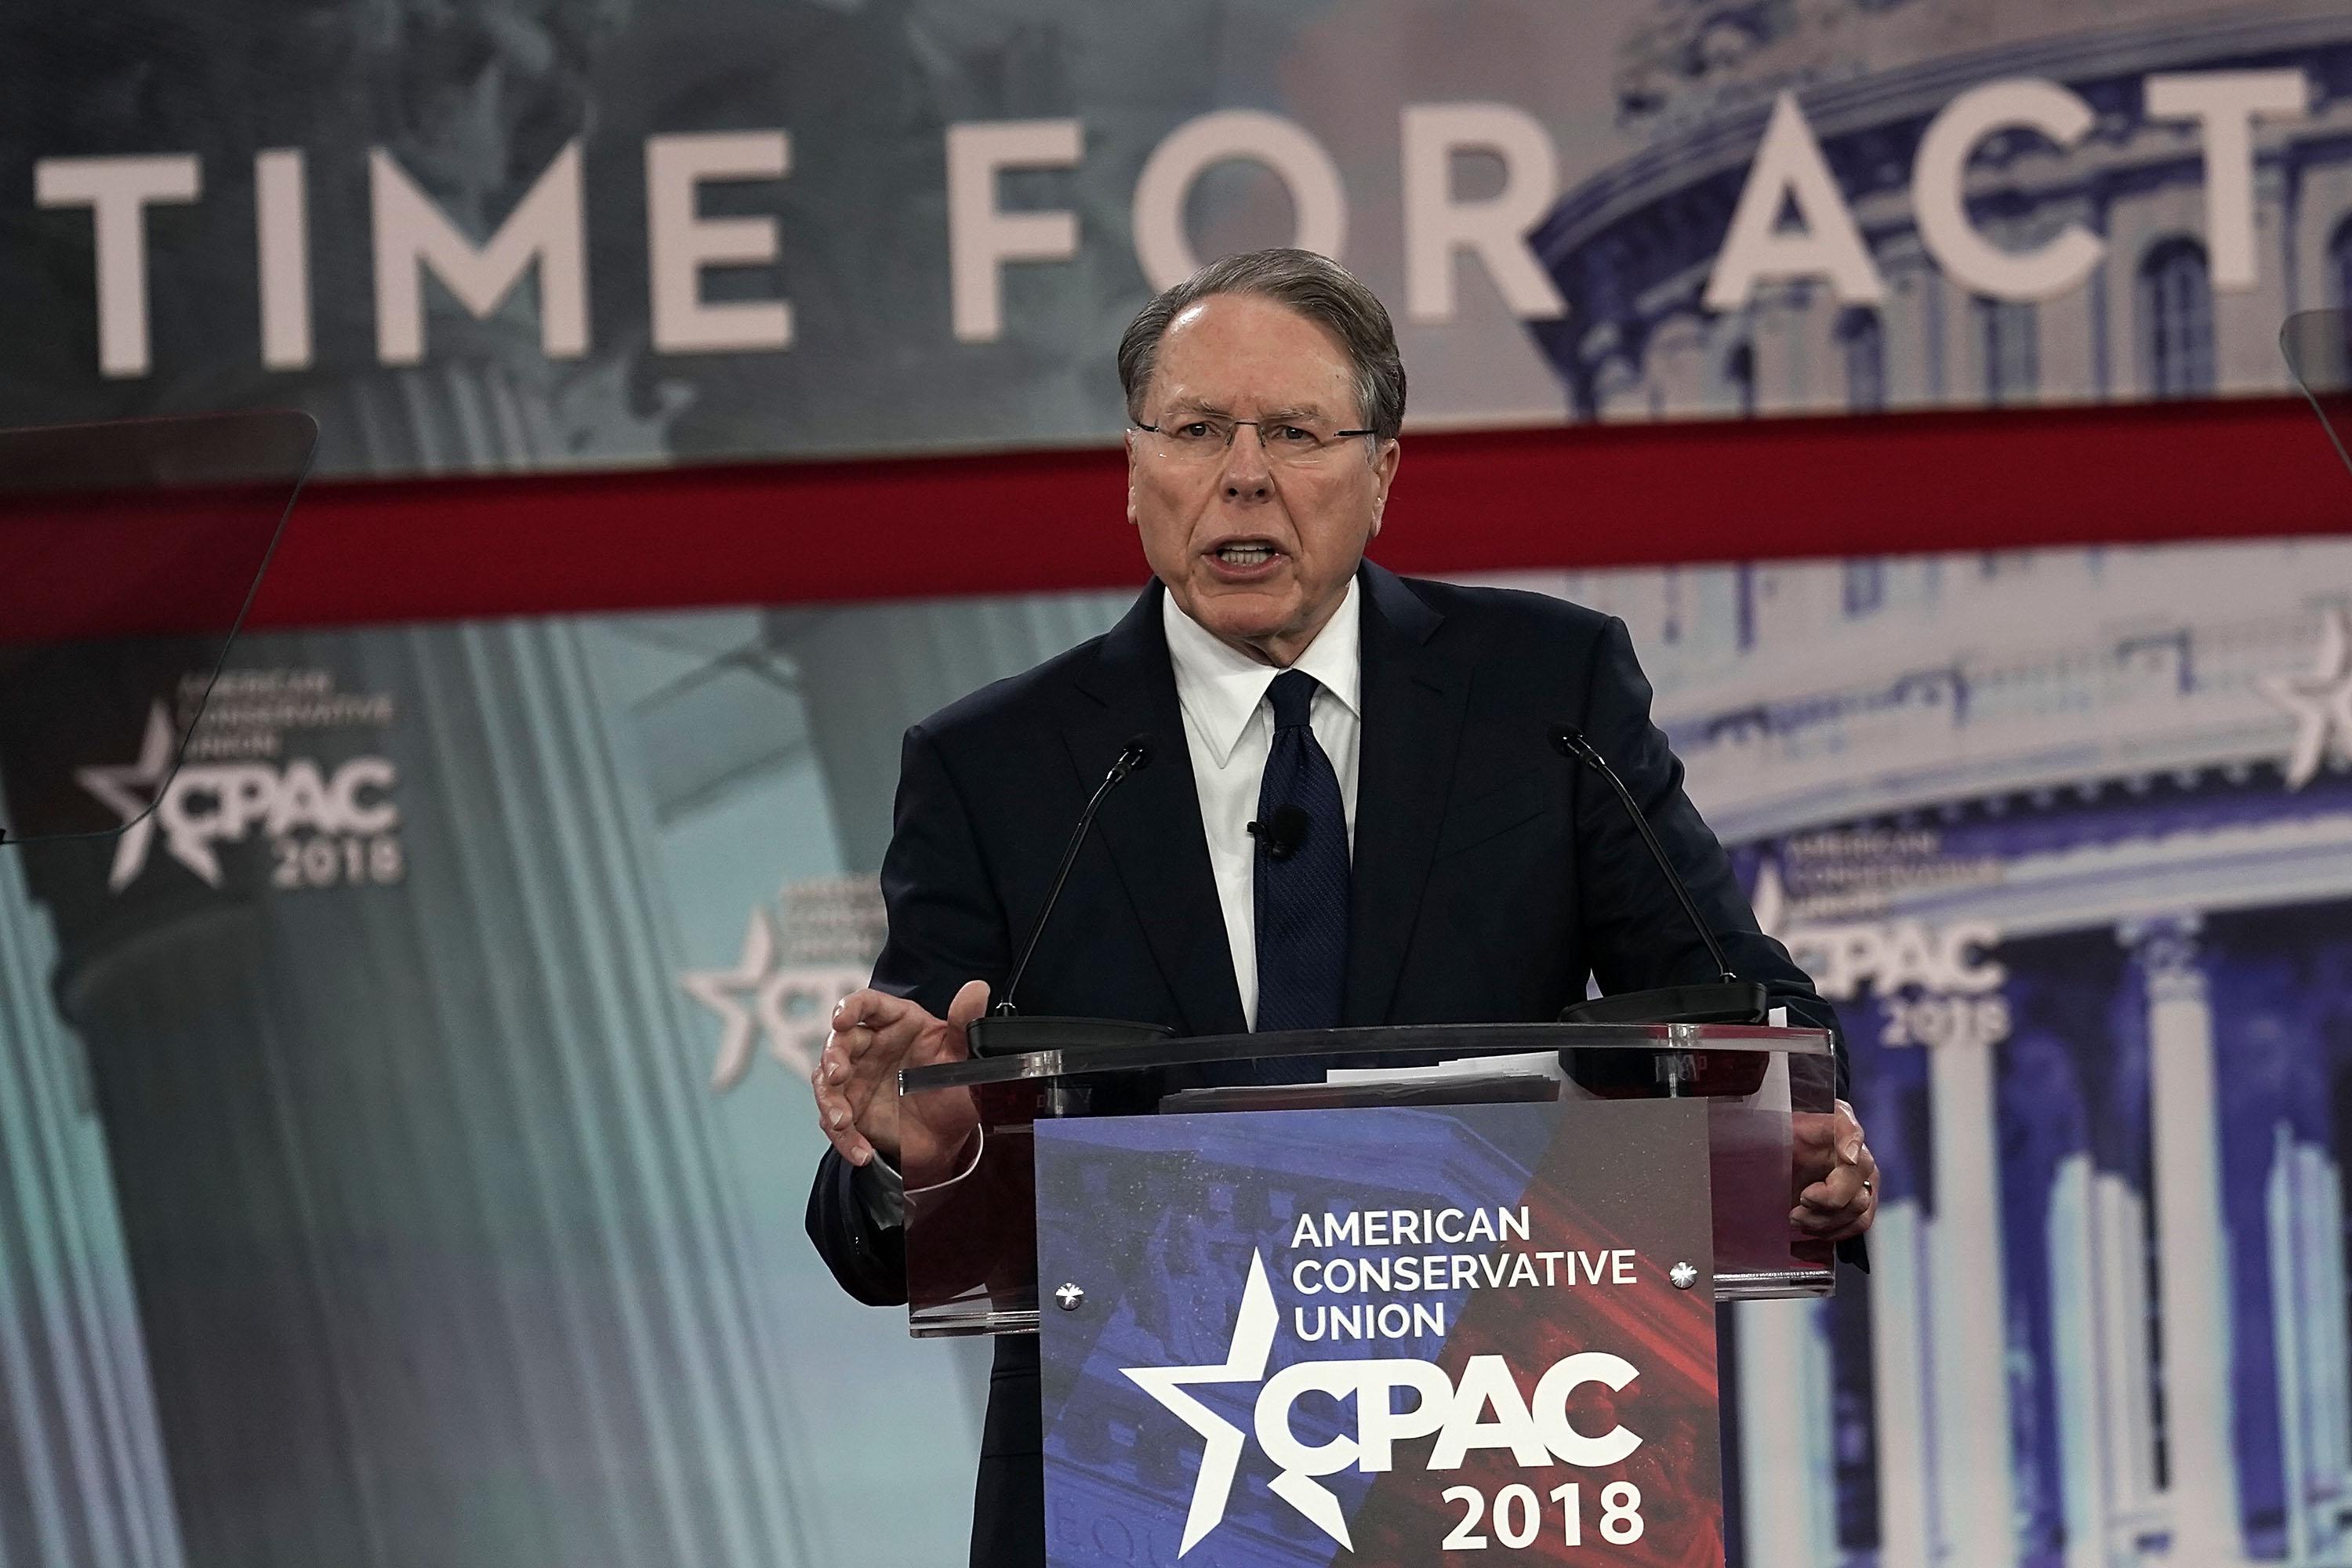 NATIONAL HARBOR, MD - FEBRUARY 22:  Vice President of the NRA Wayne LaPierre speaks during CPAC 2018 February 22, 2018 in National Harbor, Maryland. The American Conservative Union hosted its annual Conservative Political Action Conference to discuss conservative agenda.  (Photo by Alex Wong/Getty Images)